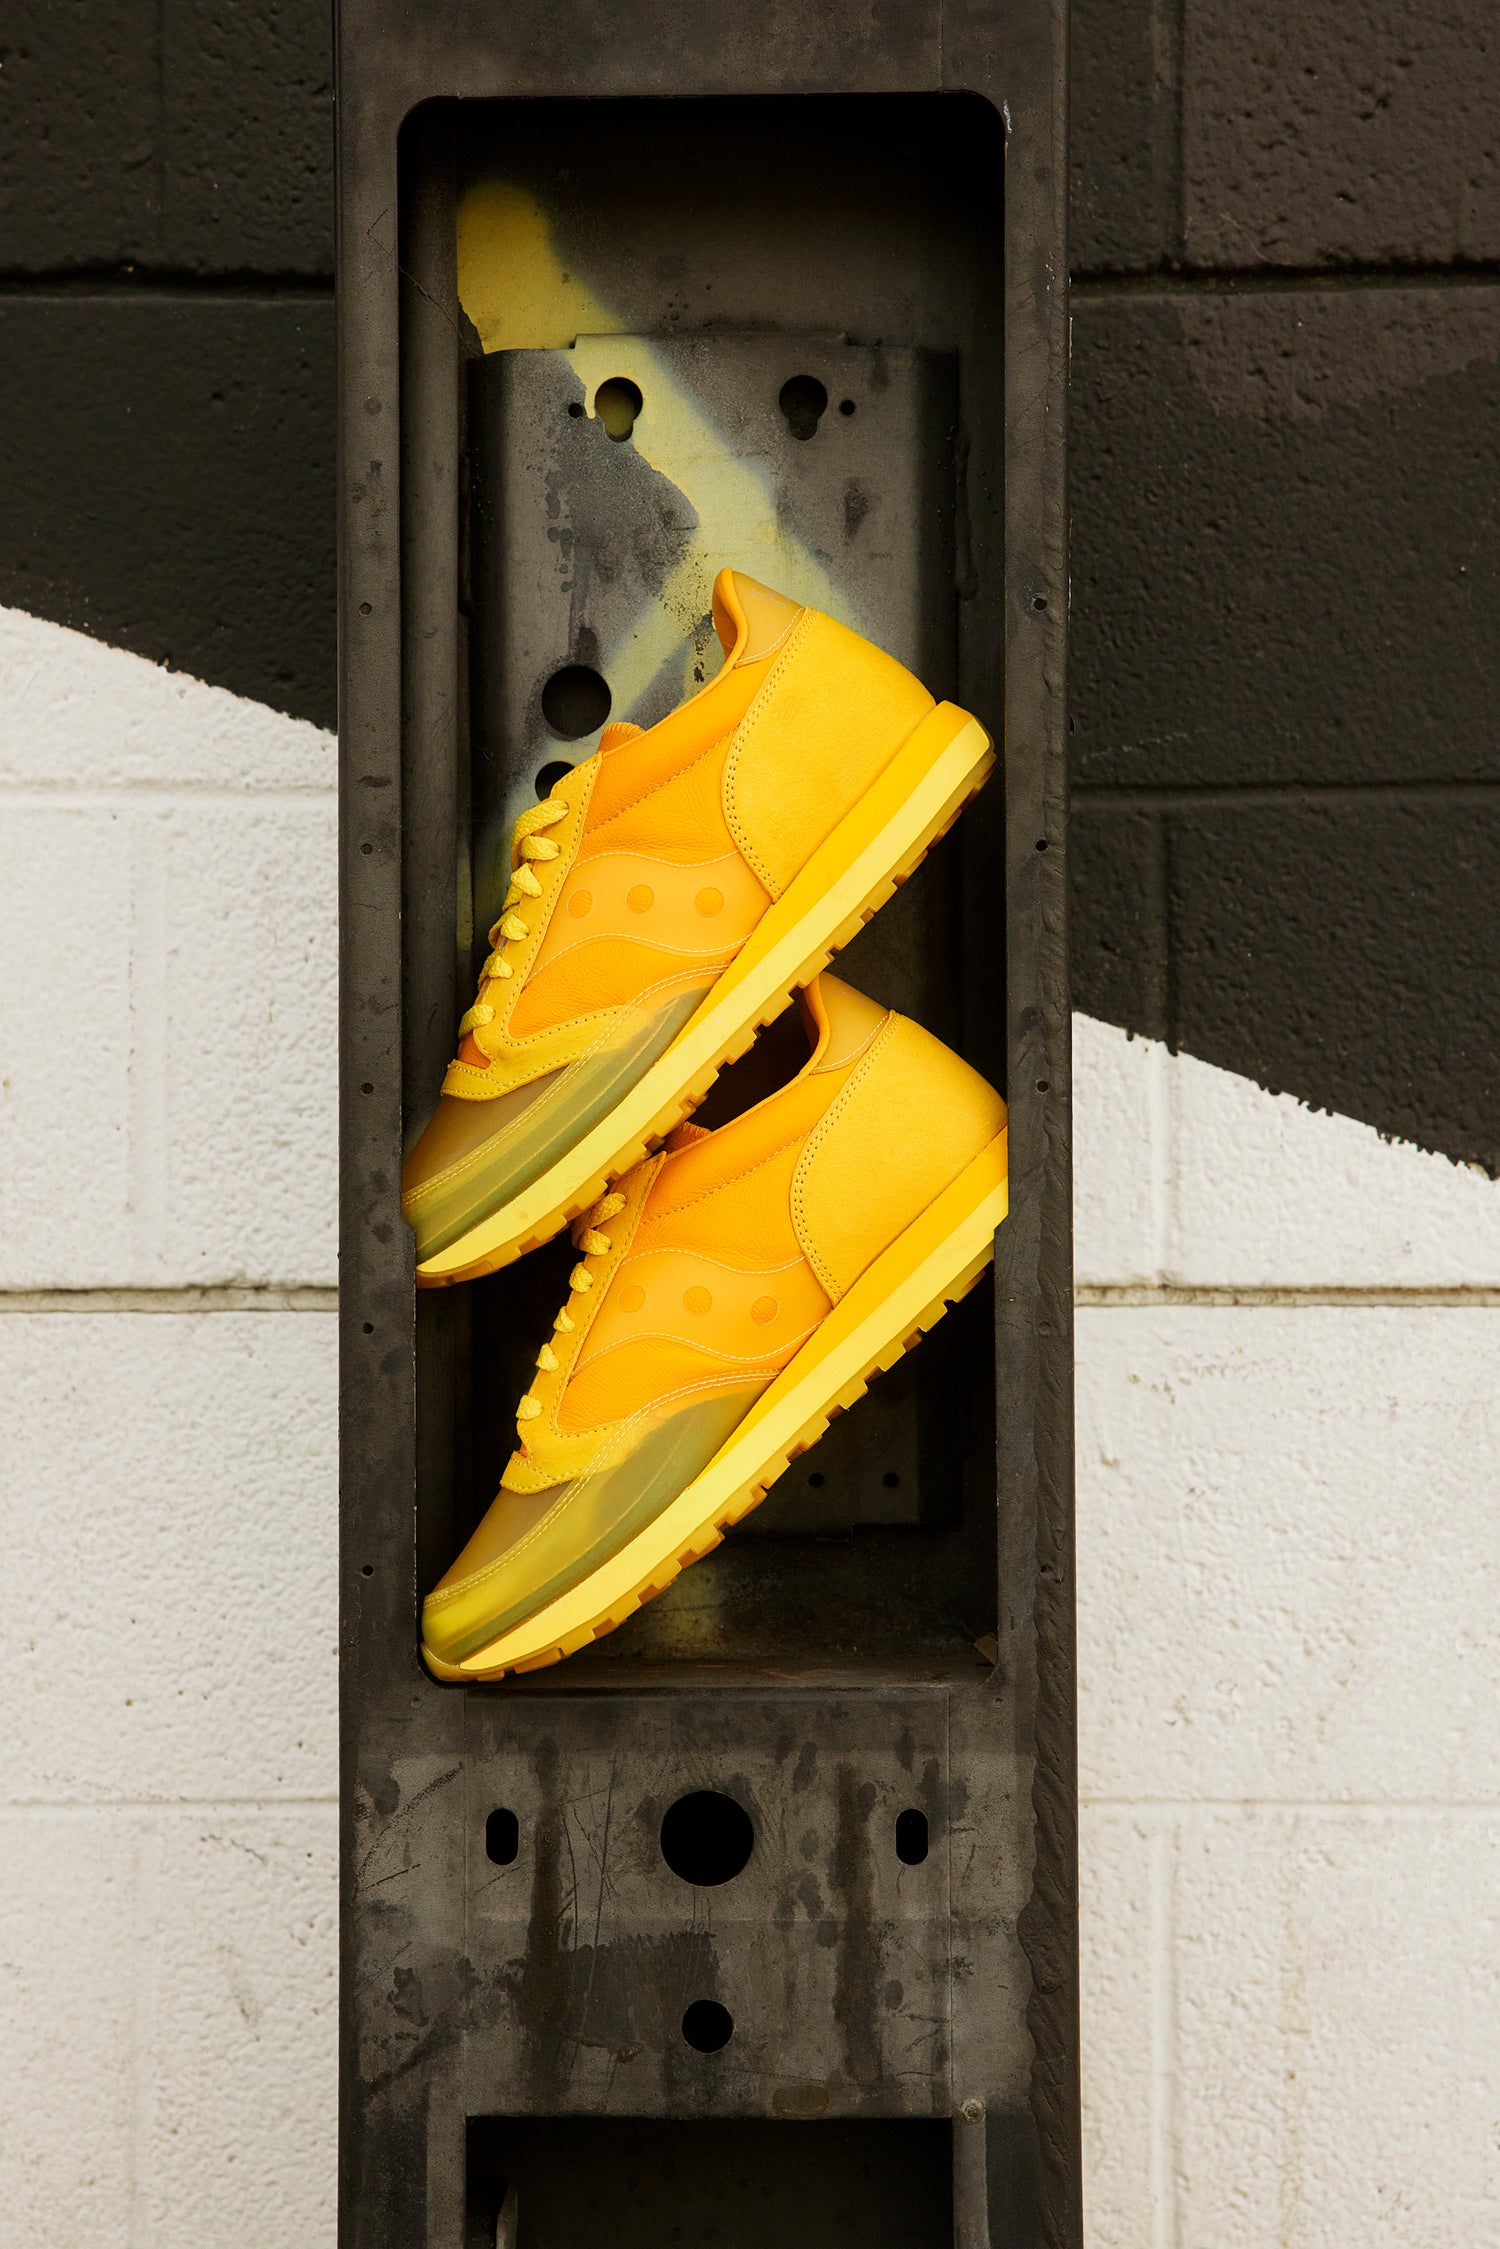 A pair of yellow sneaker on top of each other inside a grey stone box